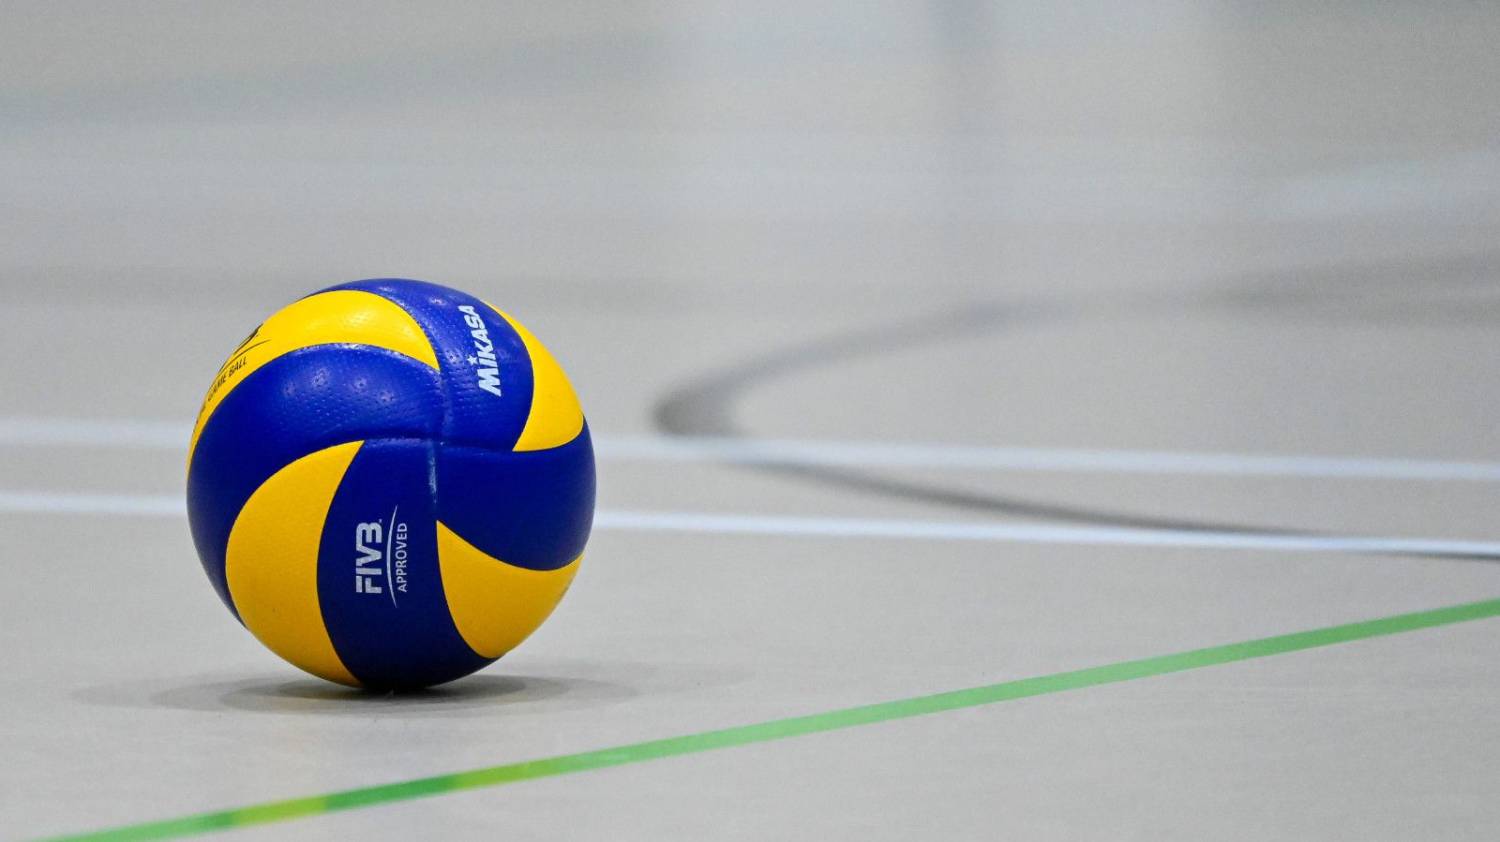 Key information for Volleyball England's 2023 AGM